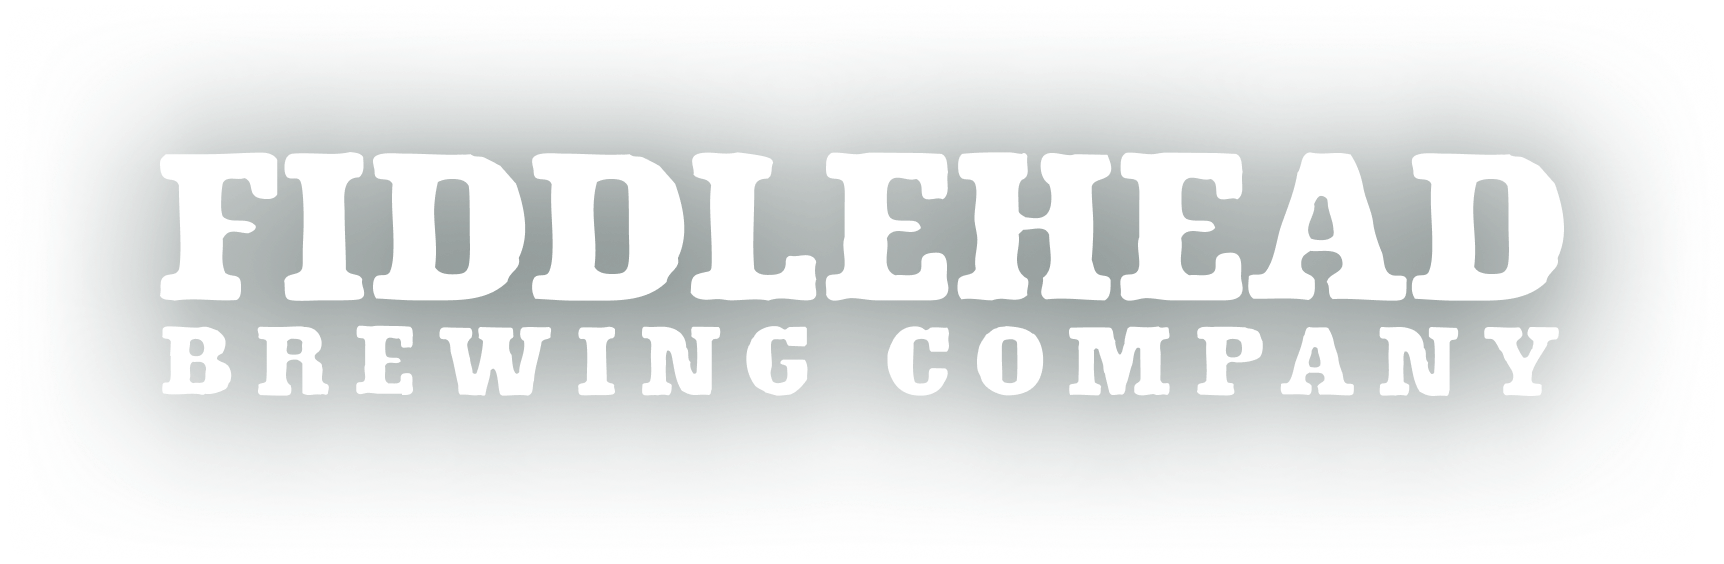 additional logo for banner - Fiddlehead Brewing Company